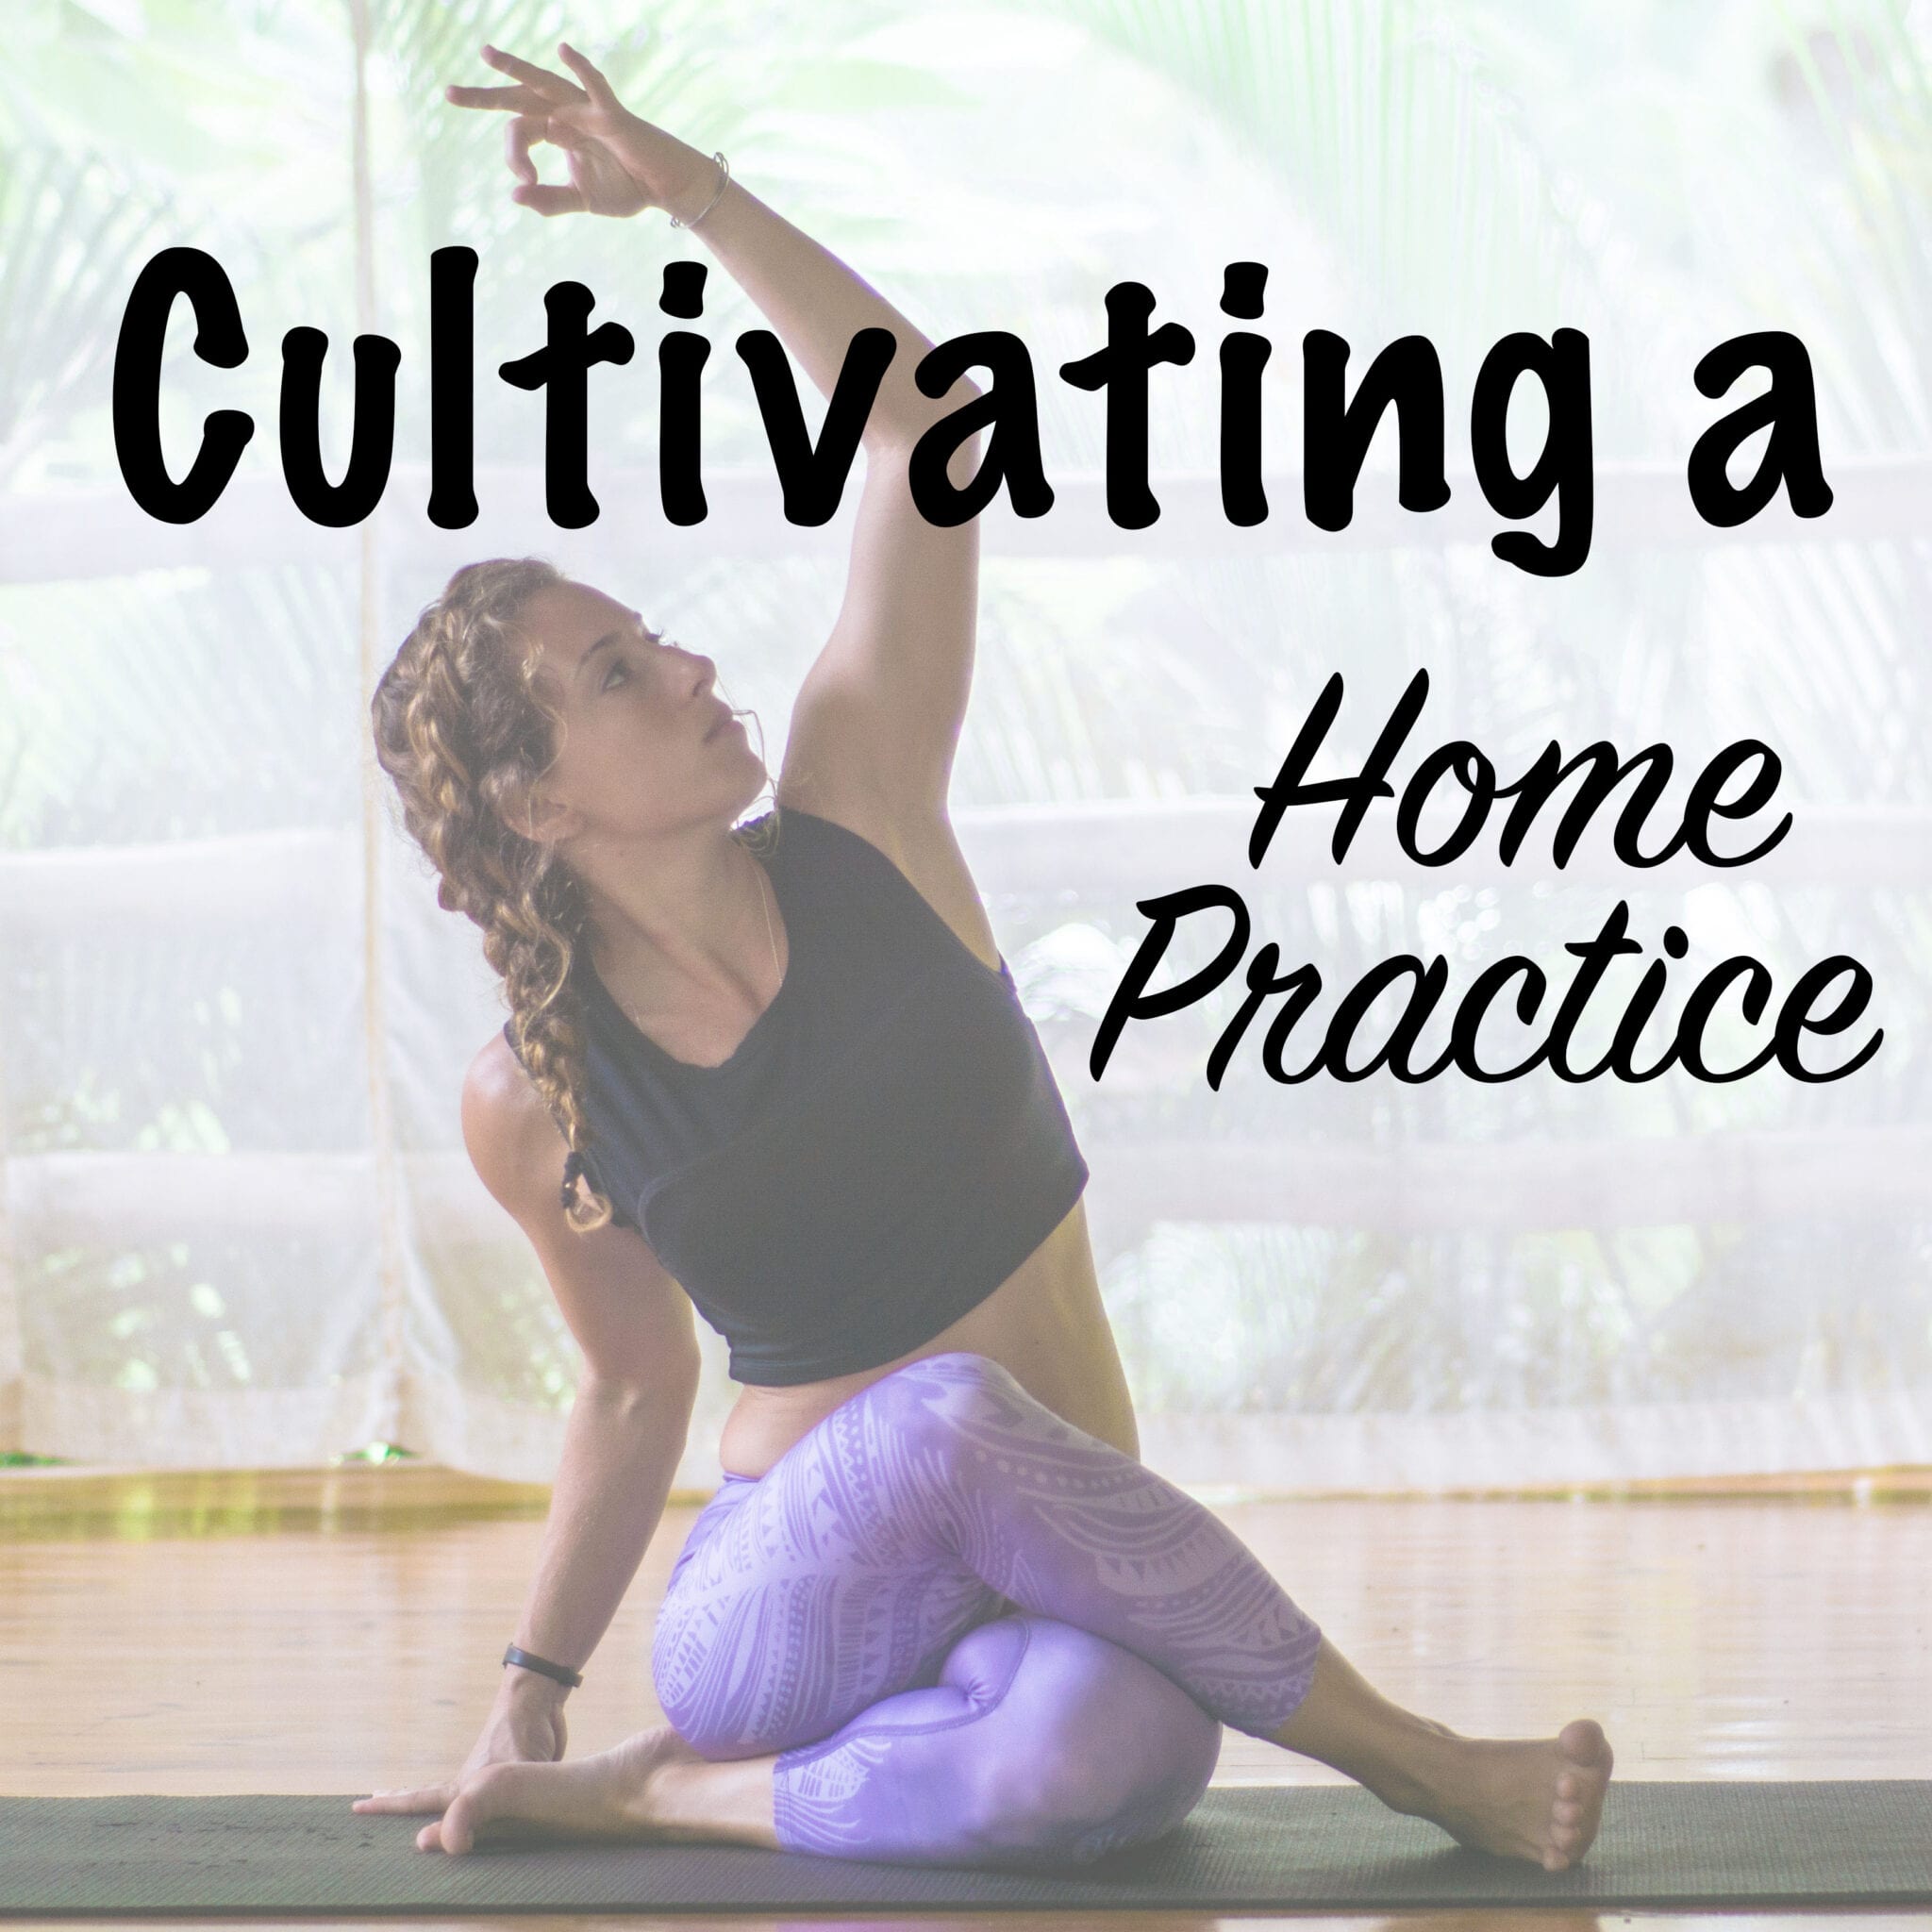 Cultivating a Home Practice